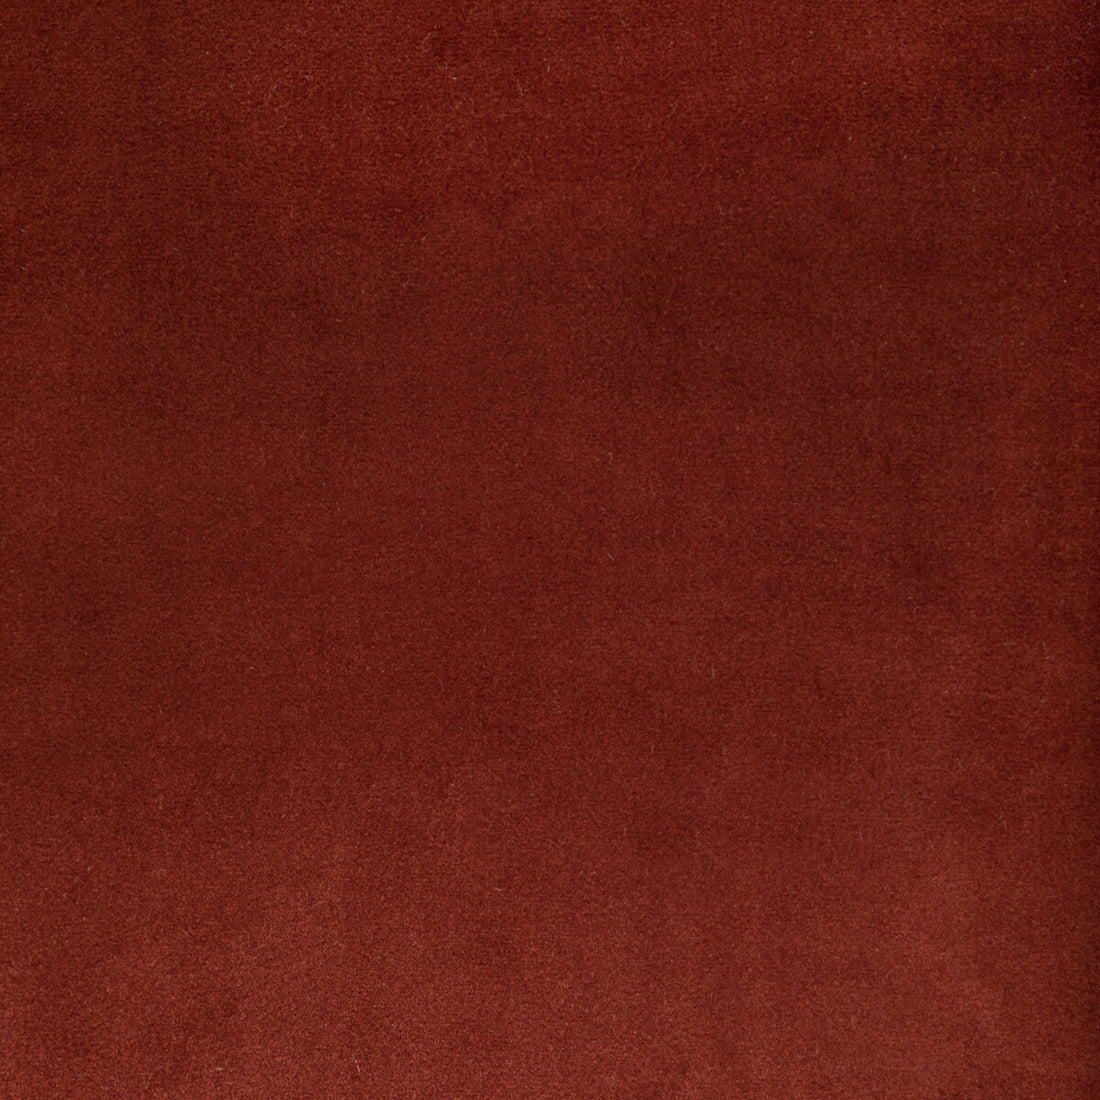 Rocco Velvet fabric in clay color - pattern 36652.624.0 - by Kravet Contract